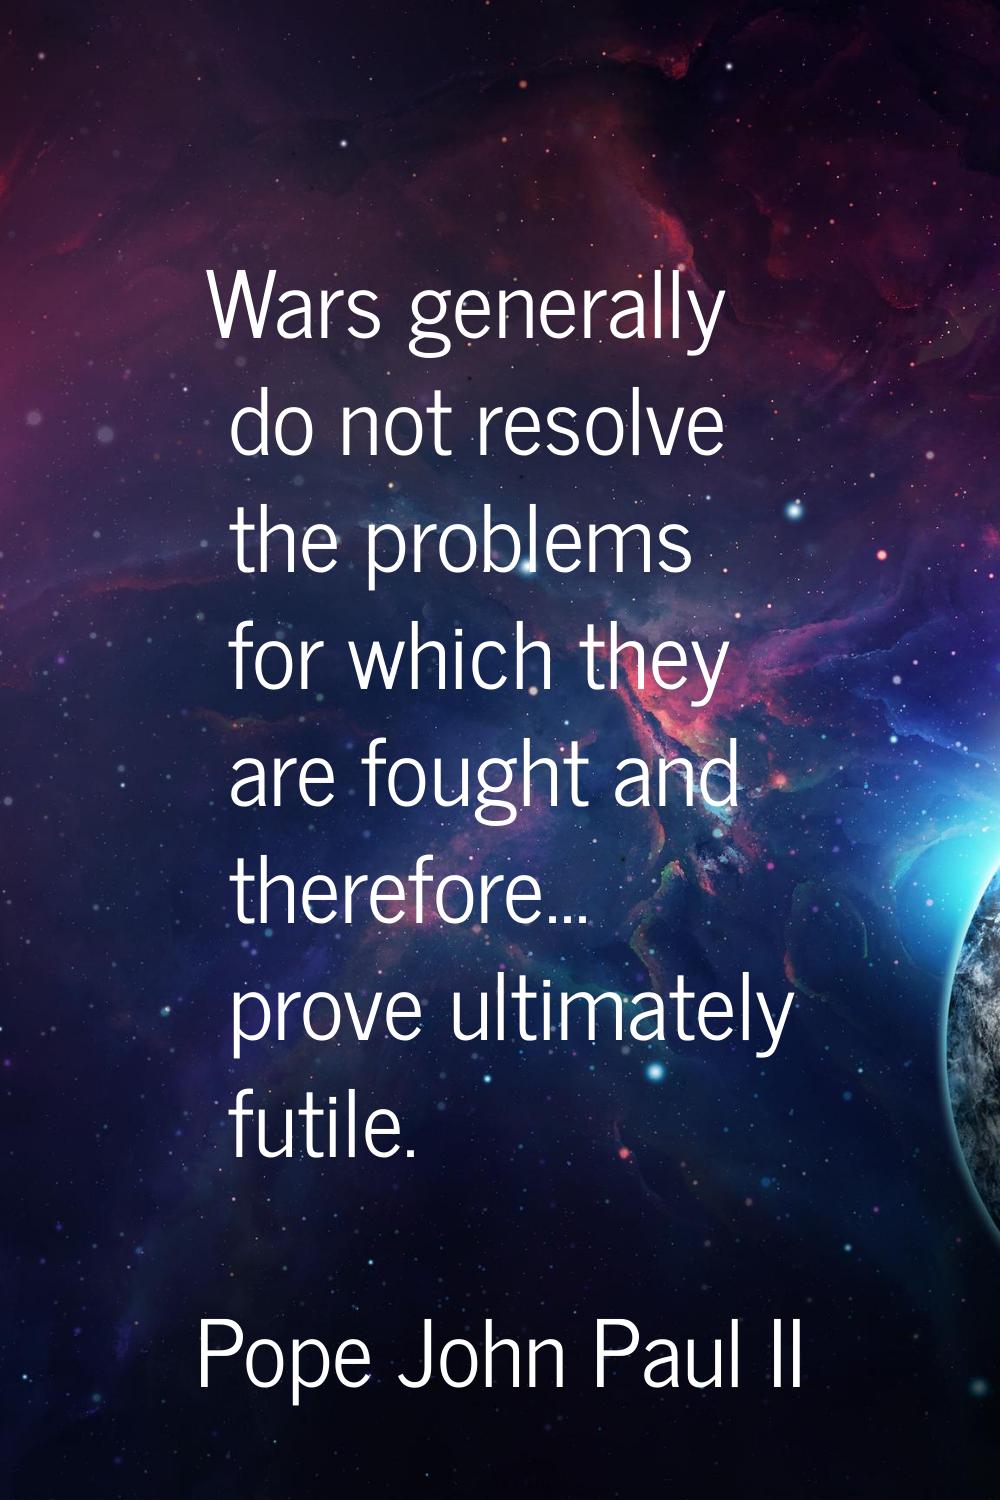 Wars generally do not resolve the problems for which they are fought and therefore... prove ultimat